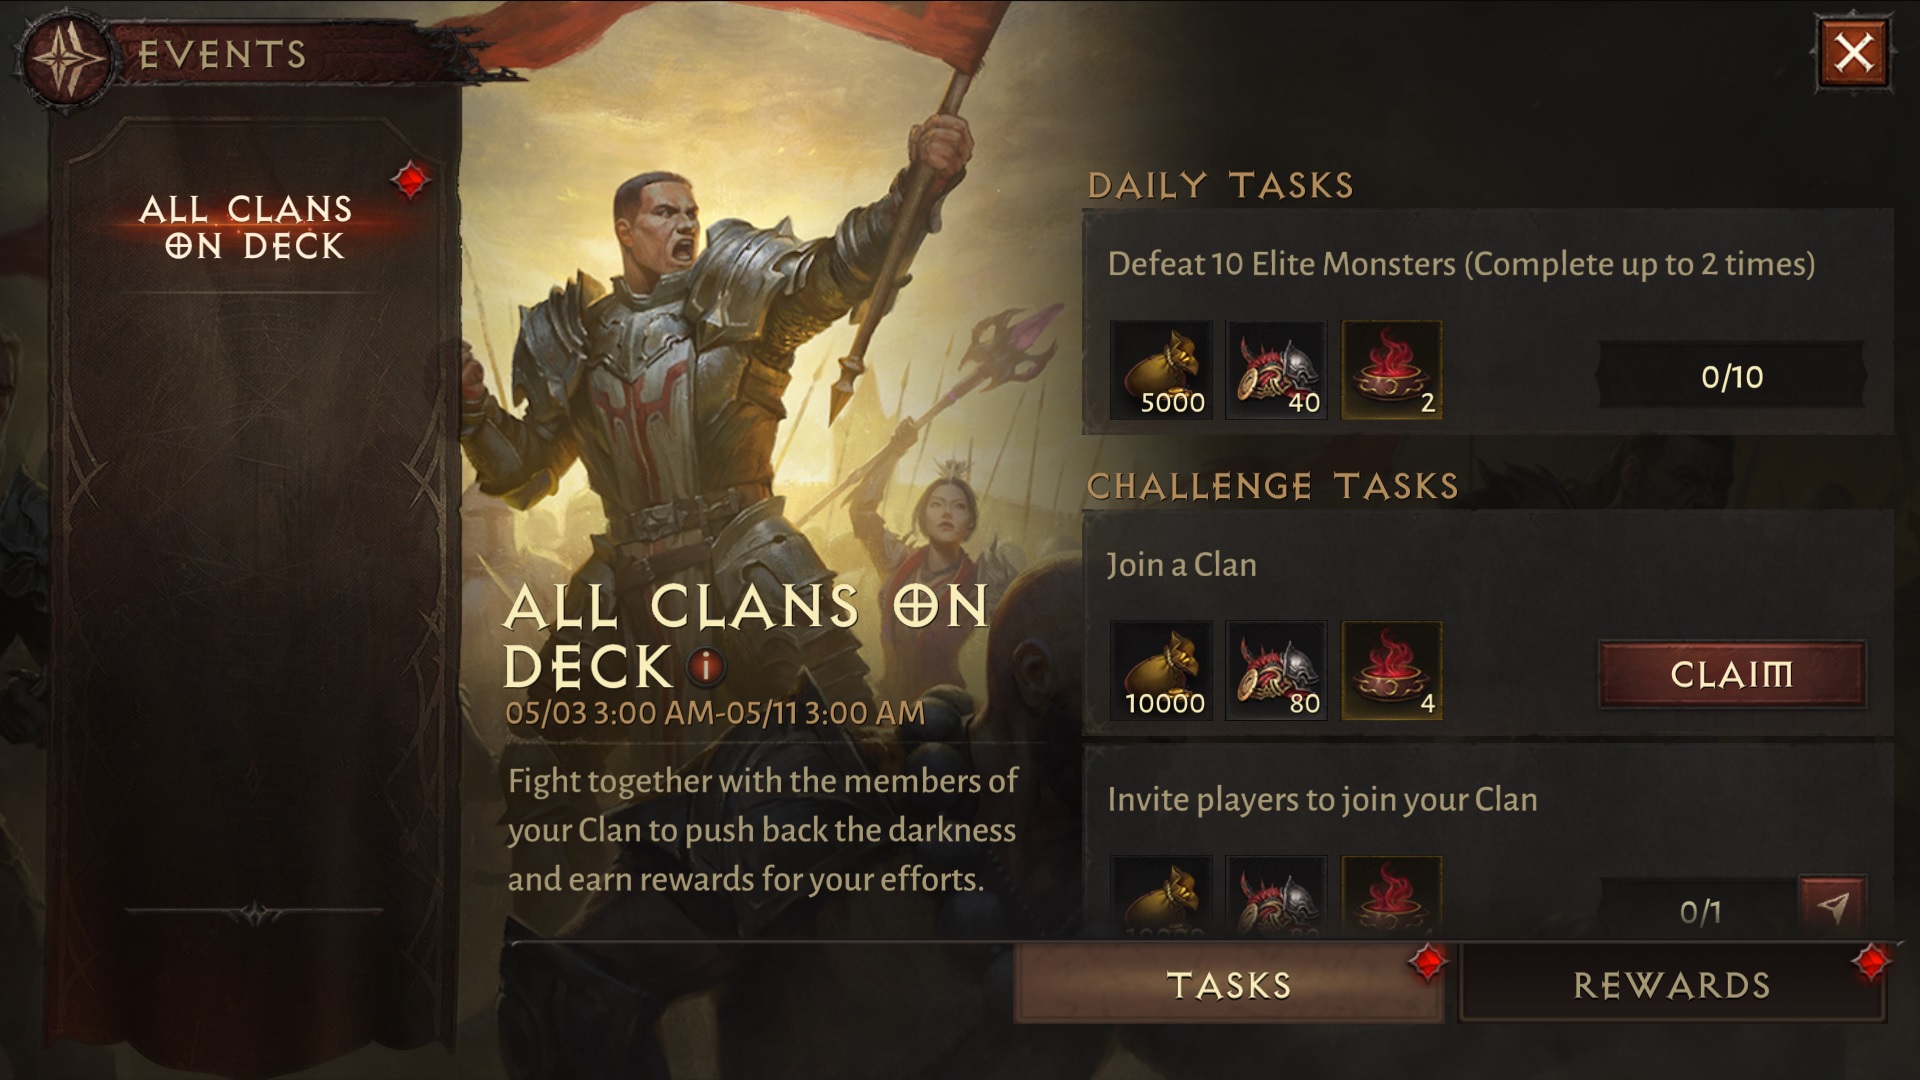 Diablo Immortal: All Clans on Deck Event Guide